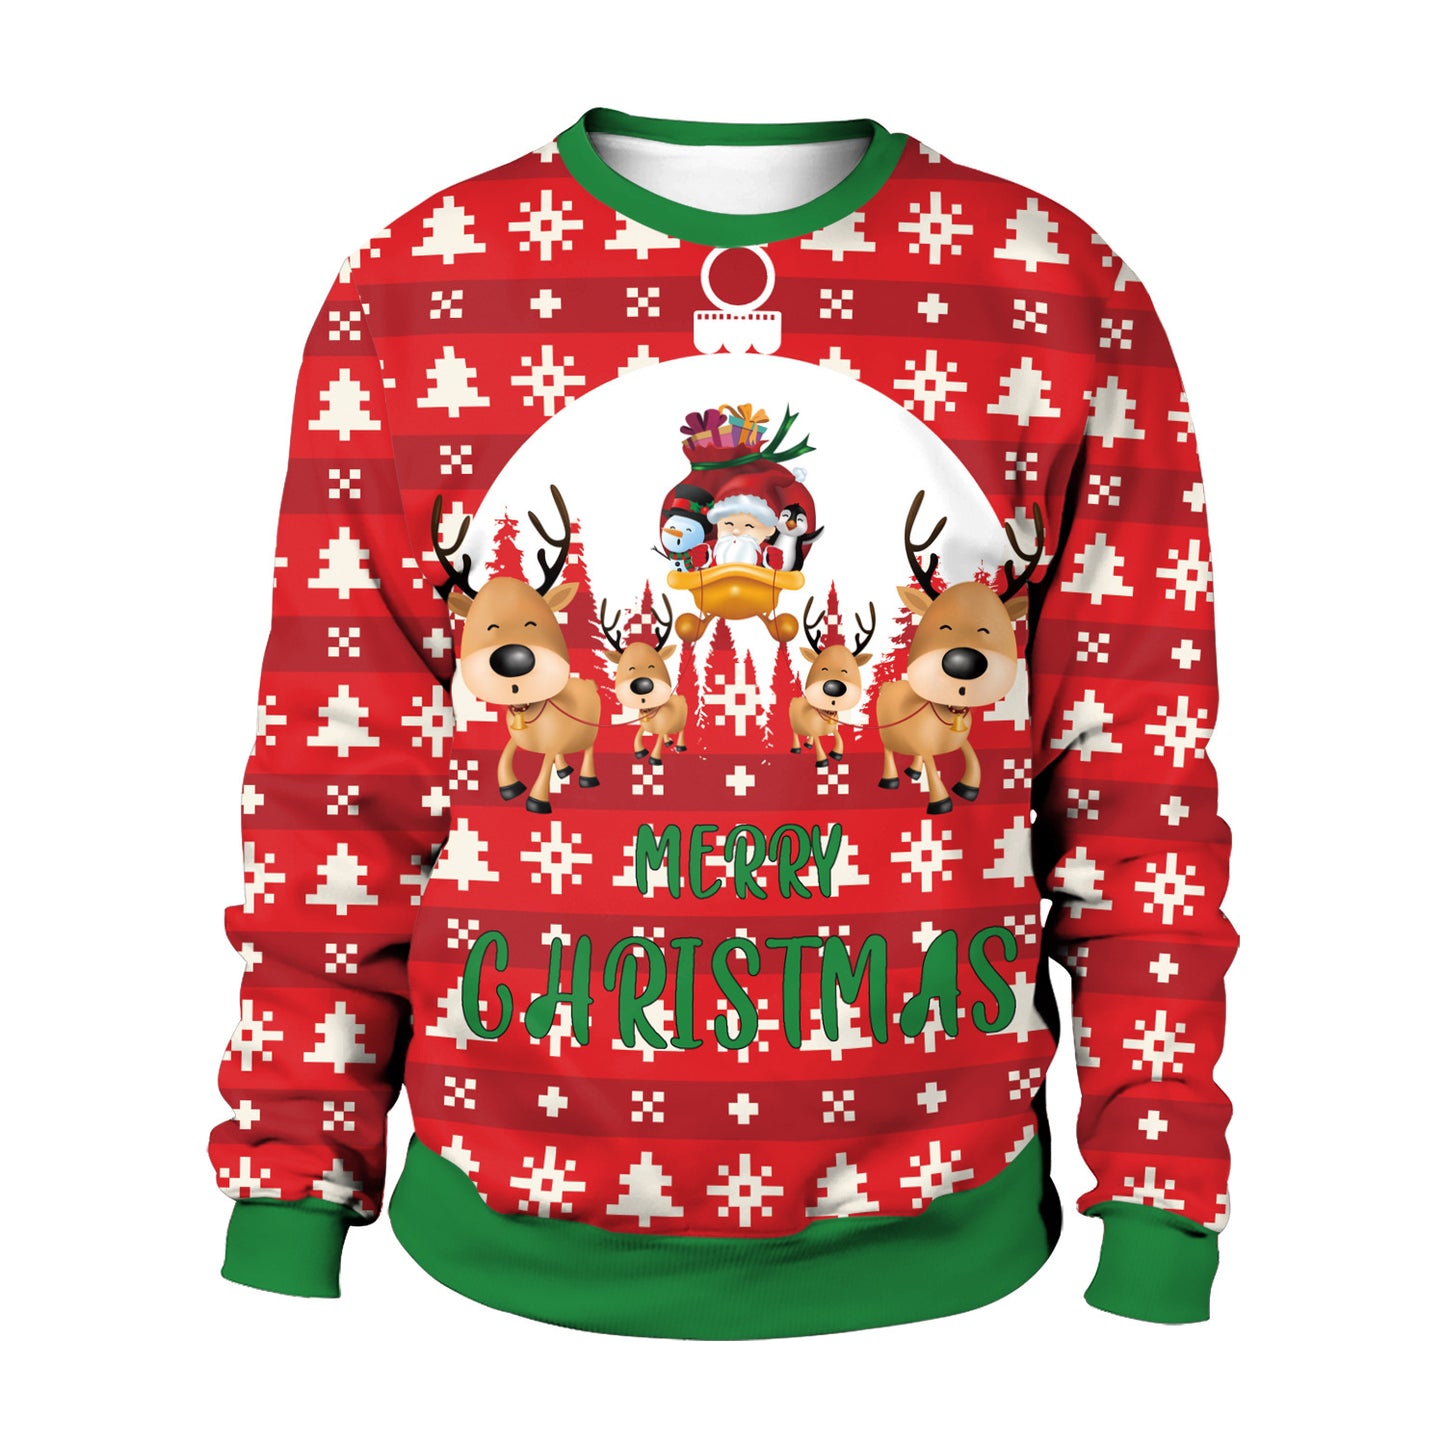 Men And Women Digital Printing Christmas Round Neck Sweater Tops